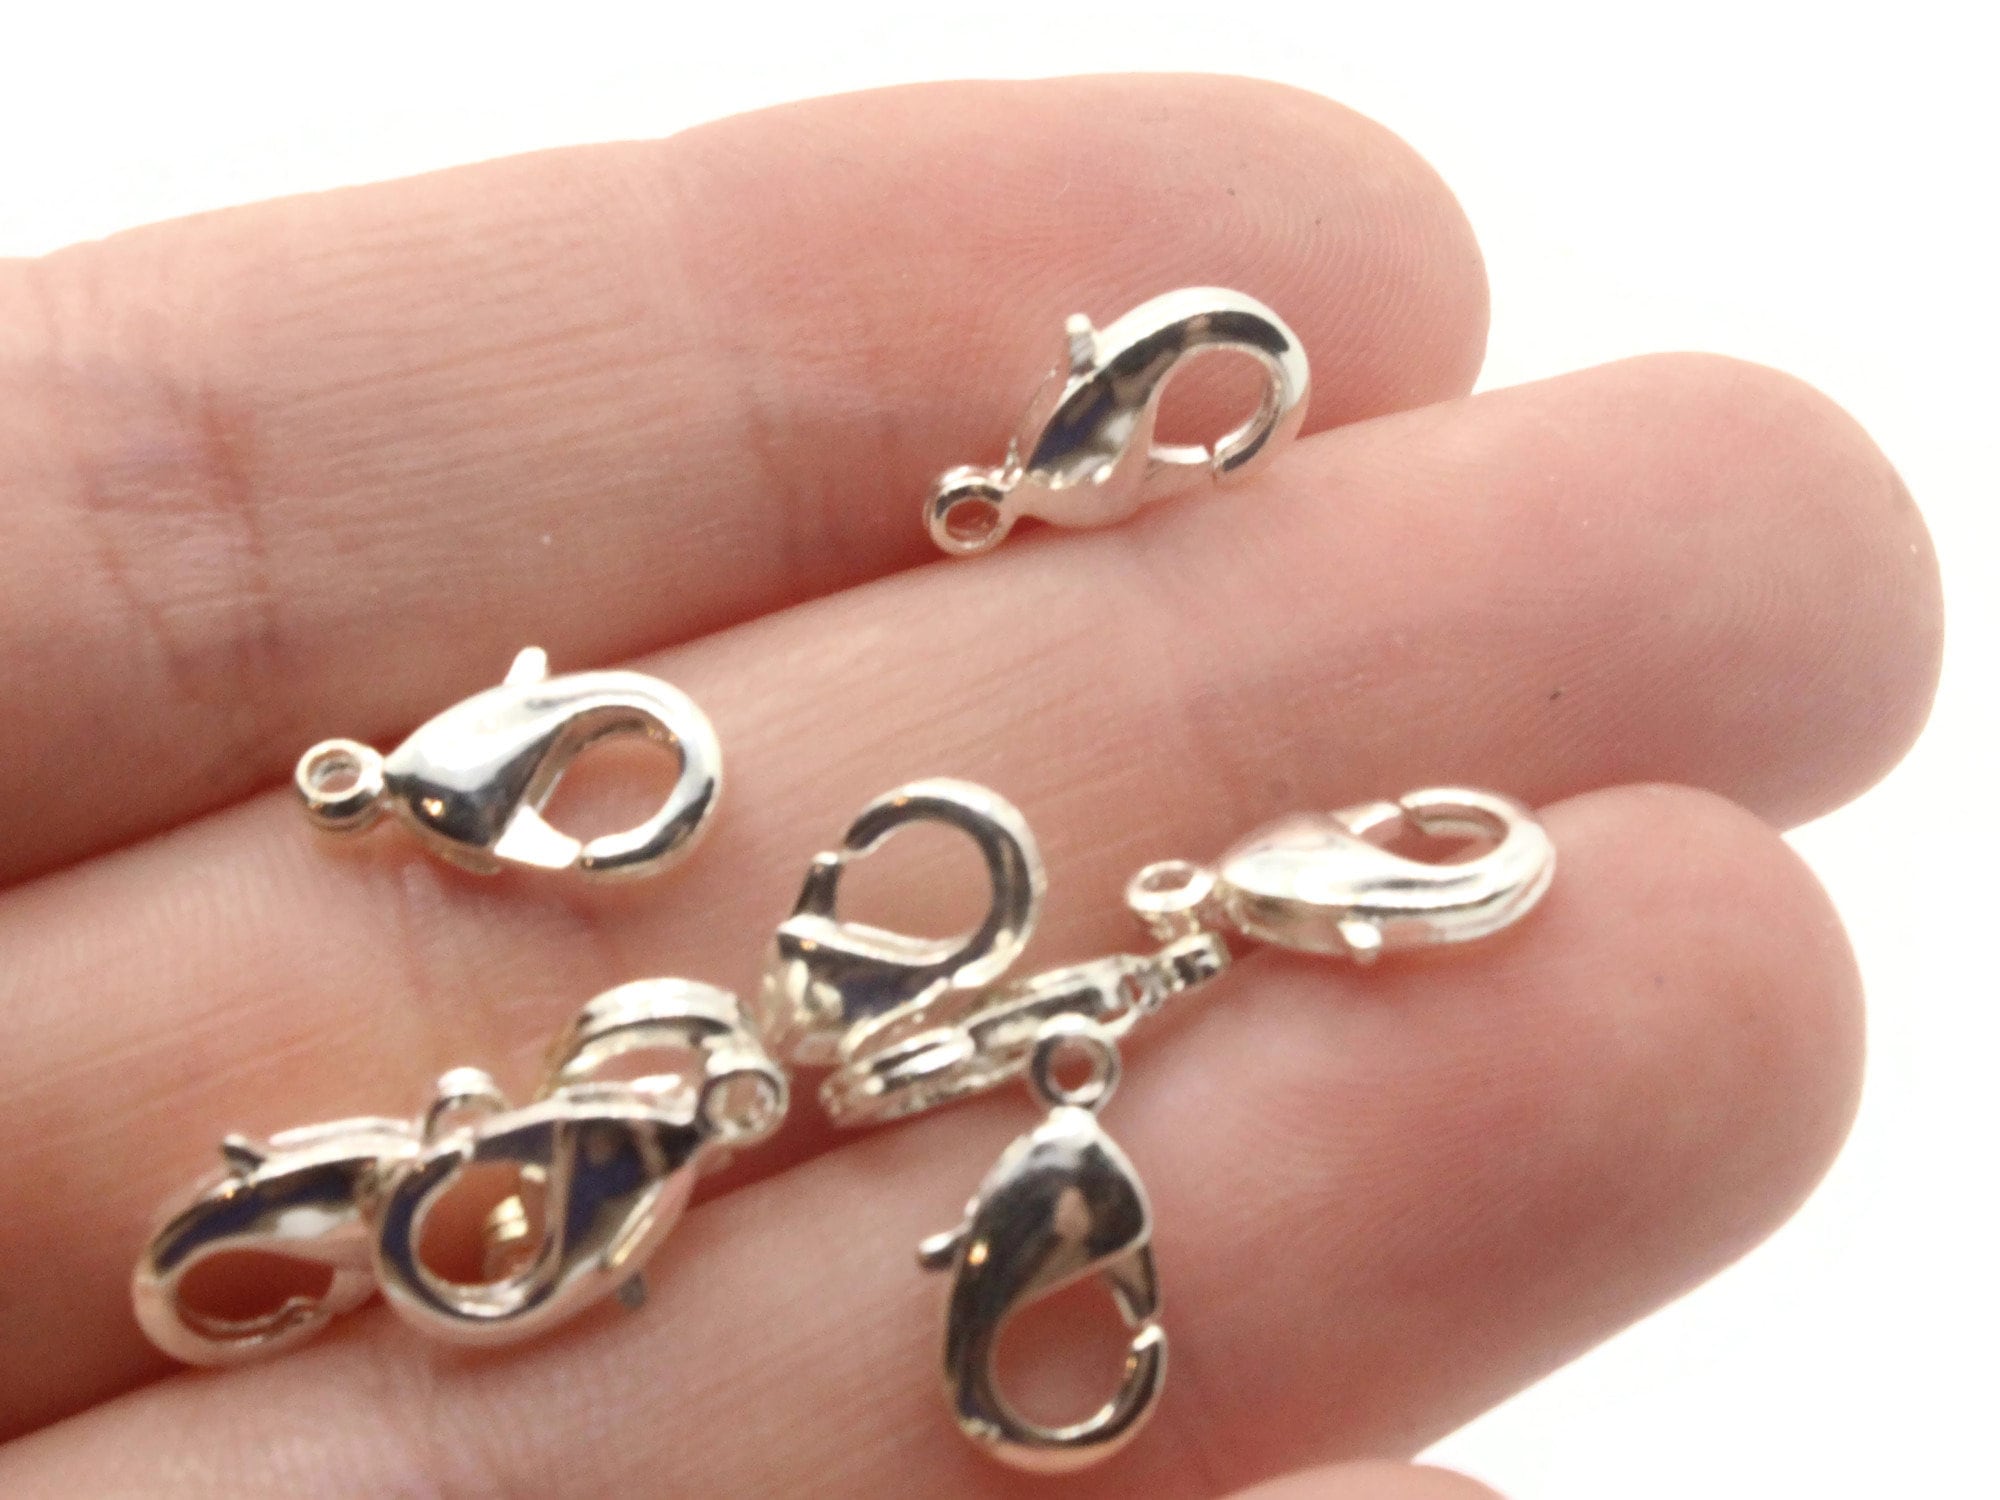 Stainless Steel Lobster Clasps appx 12mm in Size appx 15 Pieces in Total -  ALW023